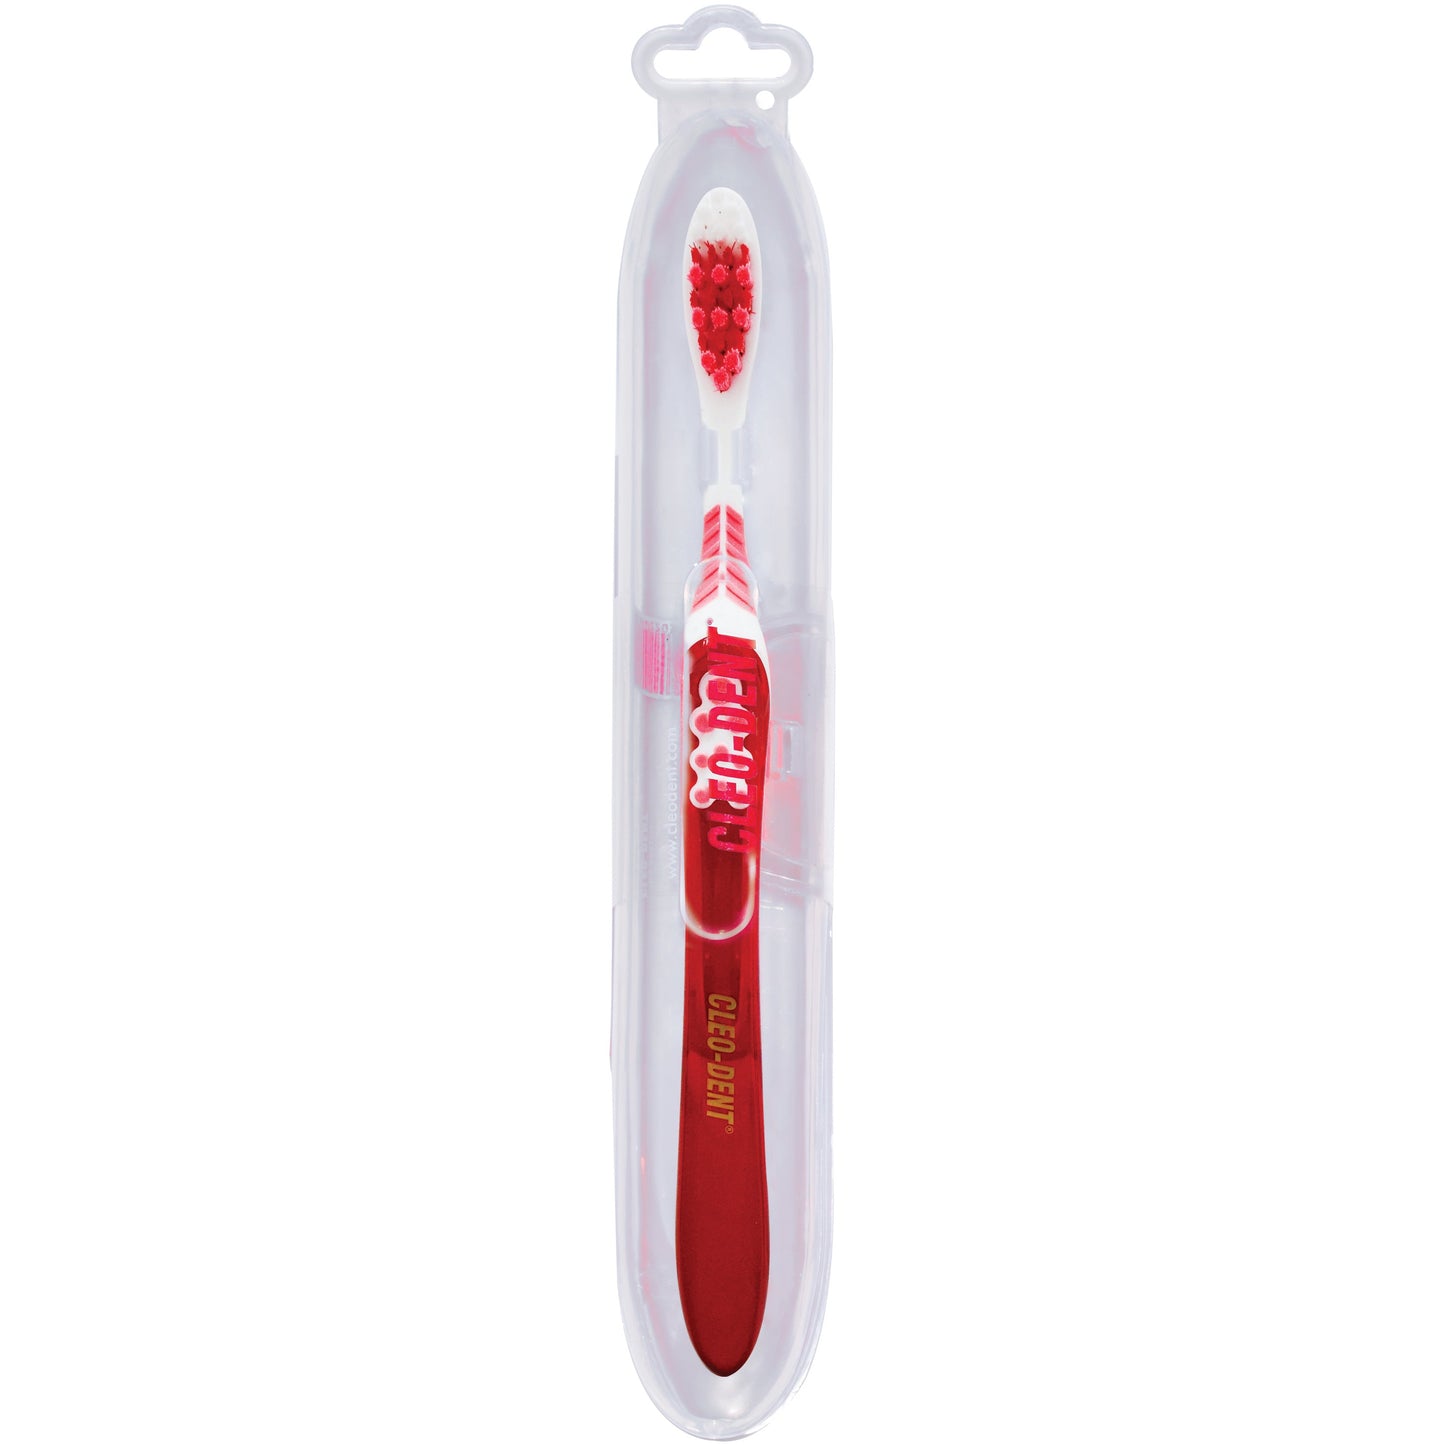 OPTIMAL Cleo-Dent Maxi Clean Soft Tooth Brush